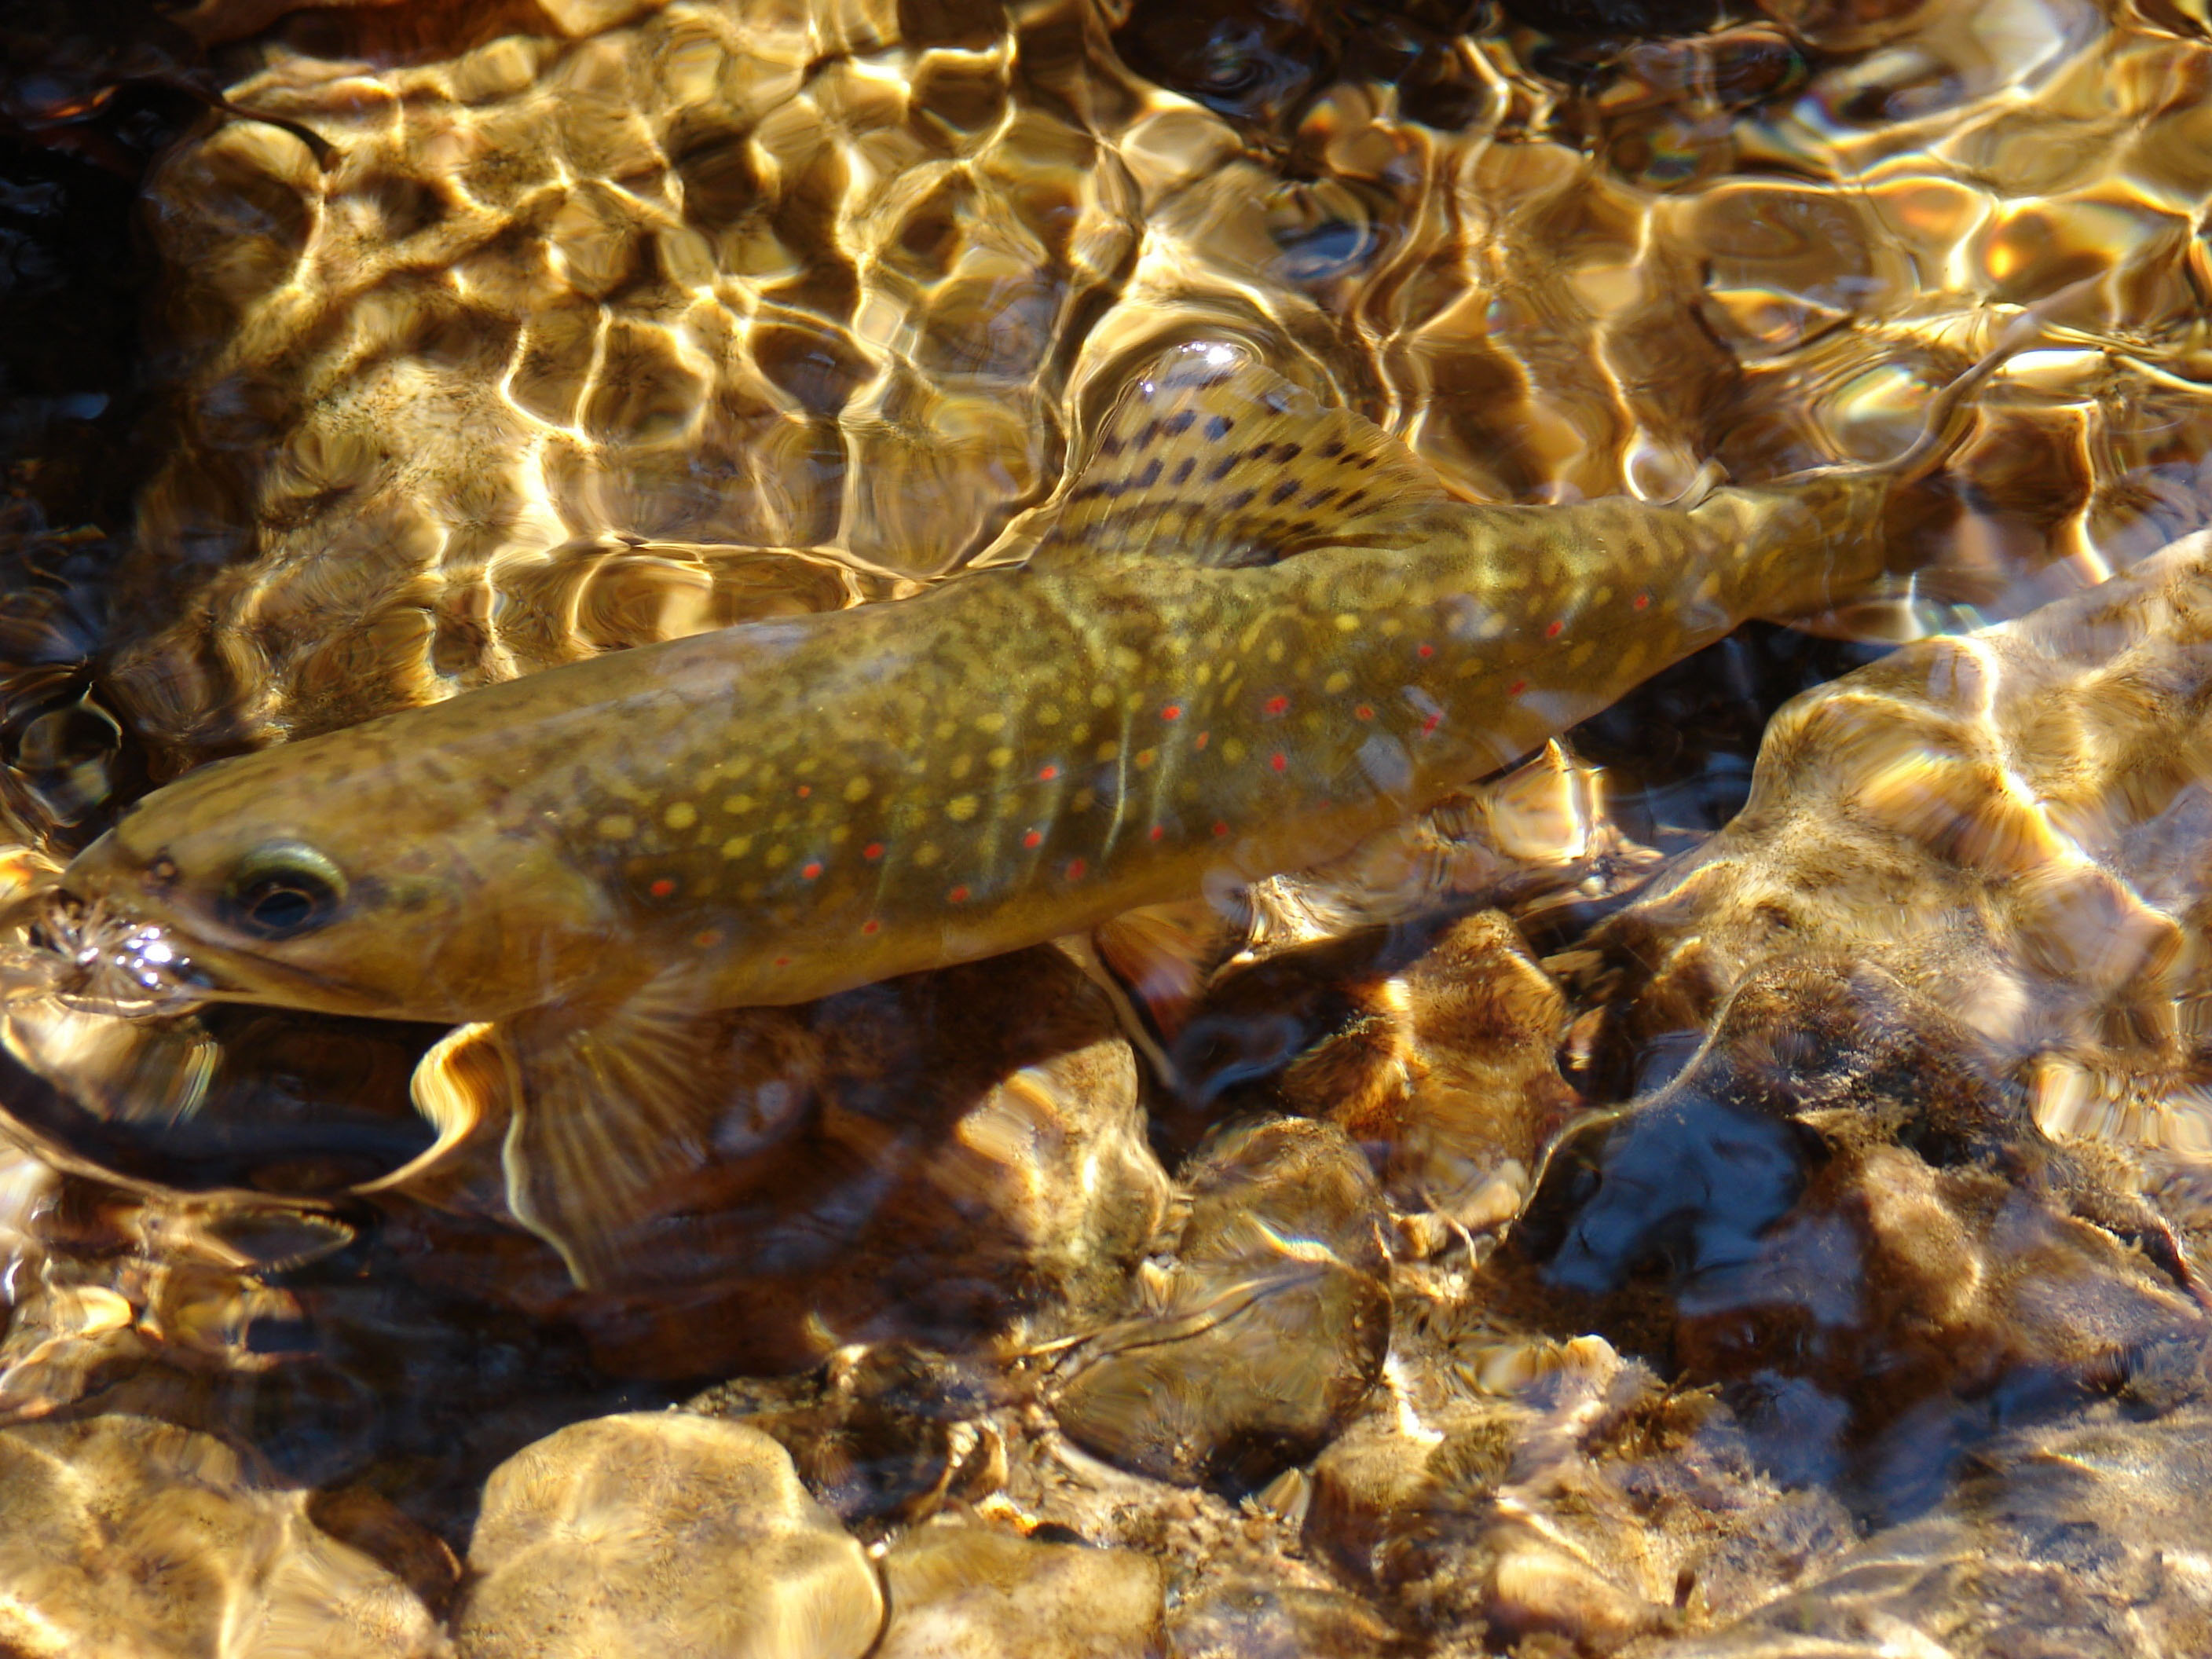 Brook trout in the water swimming